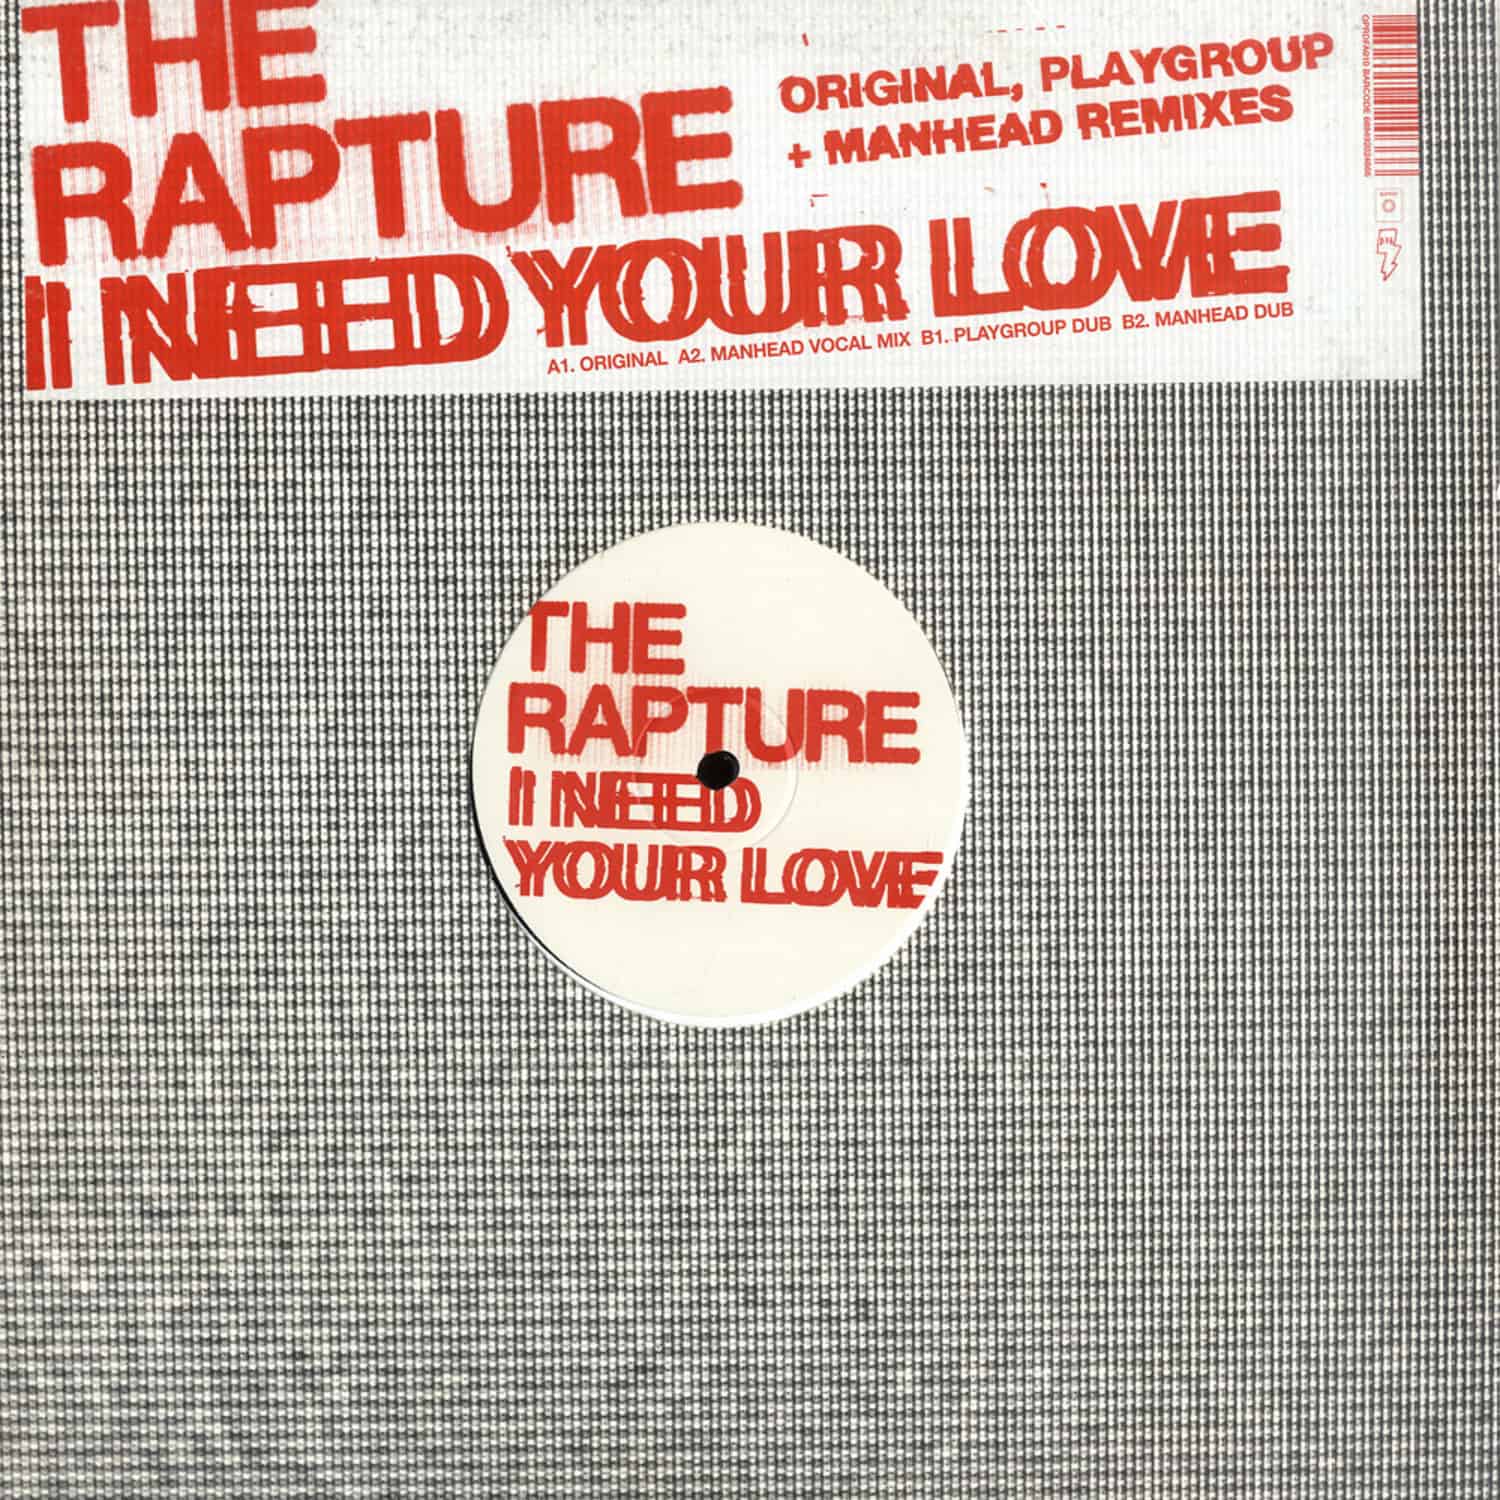 The Rapture - I NEED YOUR LOVE 